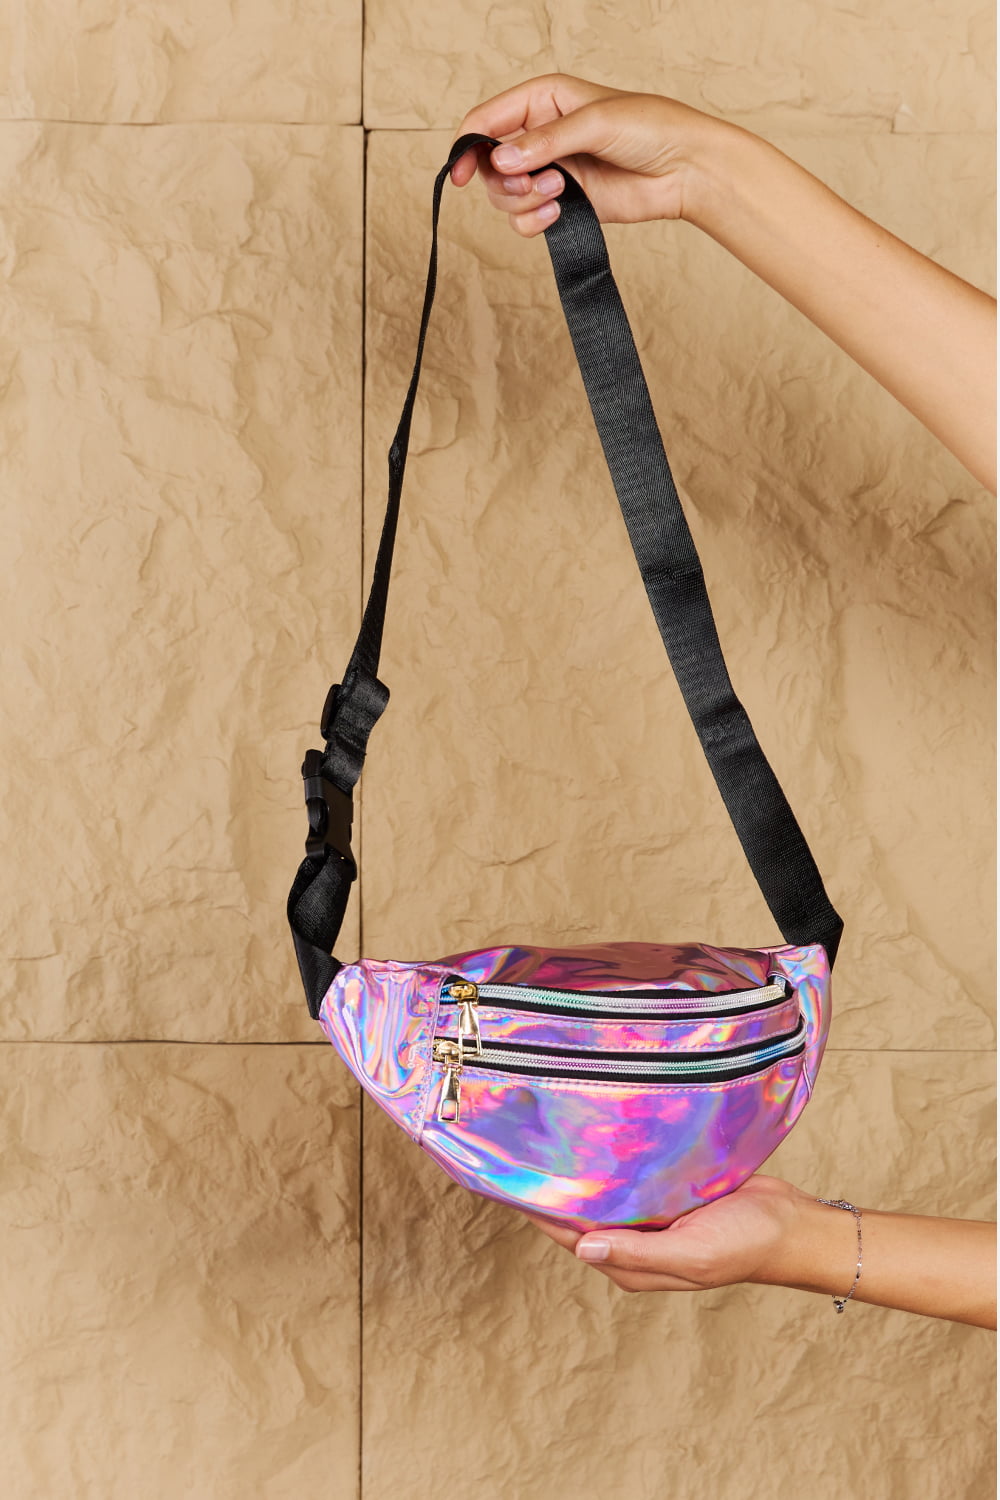 Fame Holographic Double Zipper 80s Fanny Pack in Hot Pink Waist Pack, Small Purse, Waist Belt Purse Good Vibrations